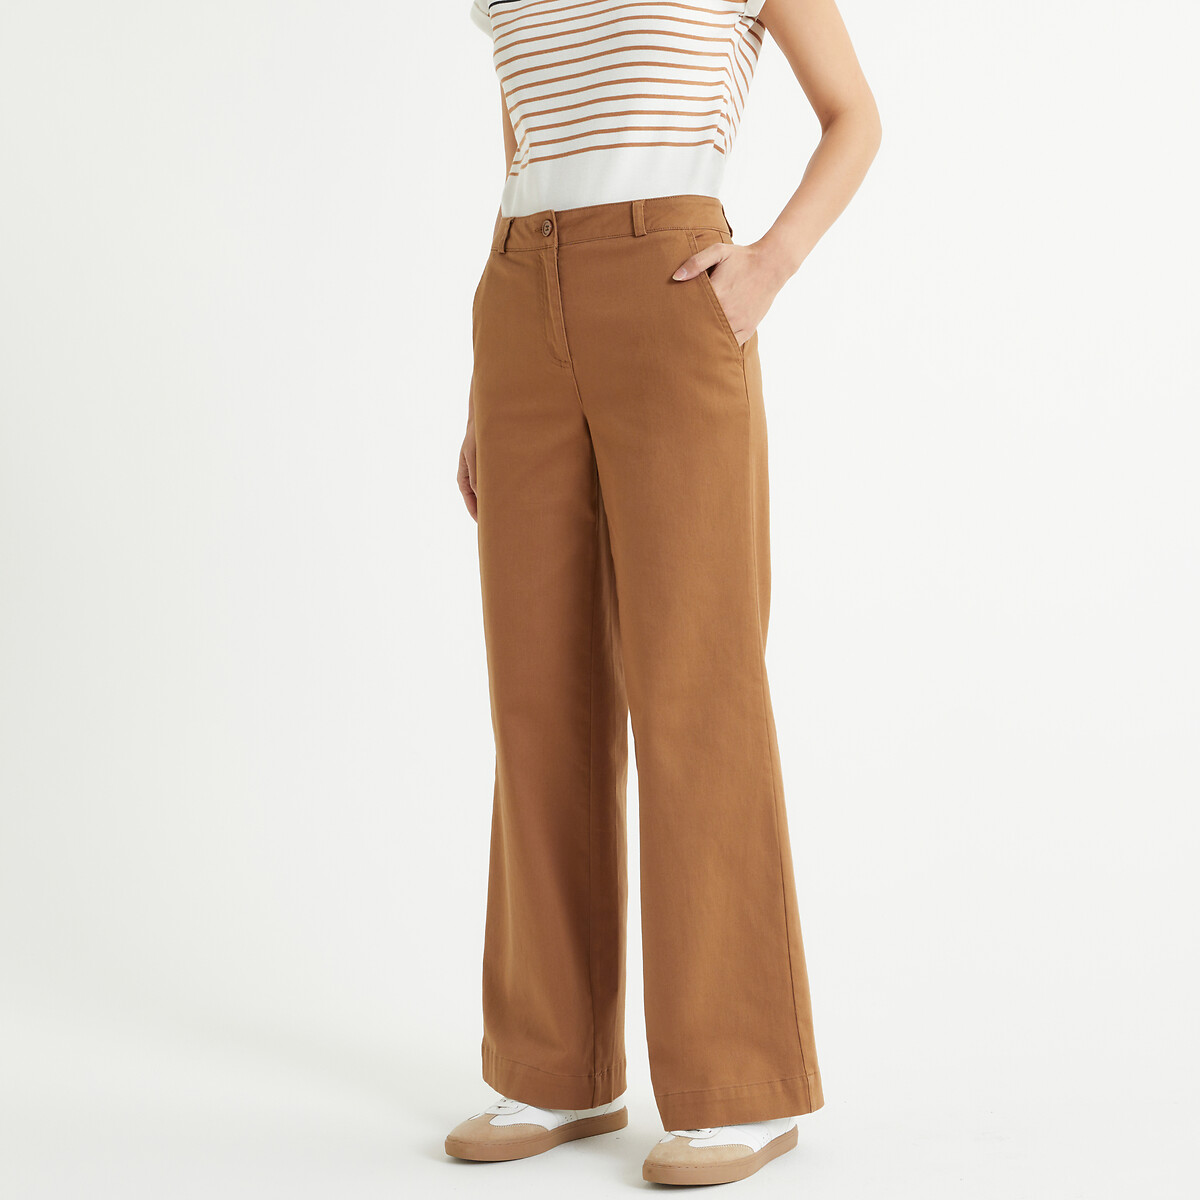 Image of Cotton Wide Leg Chinos, Length 30.5"